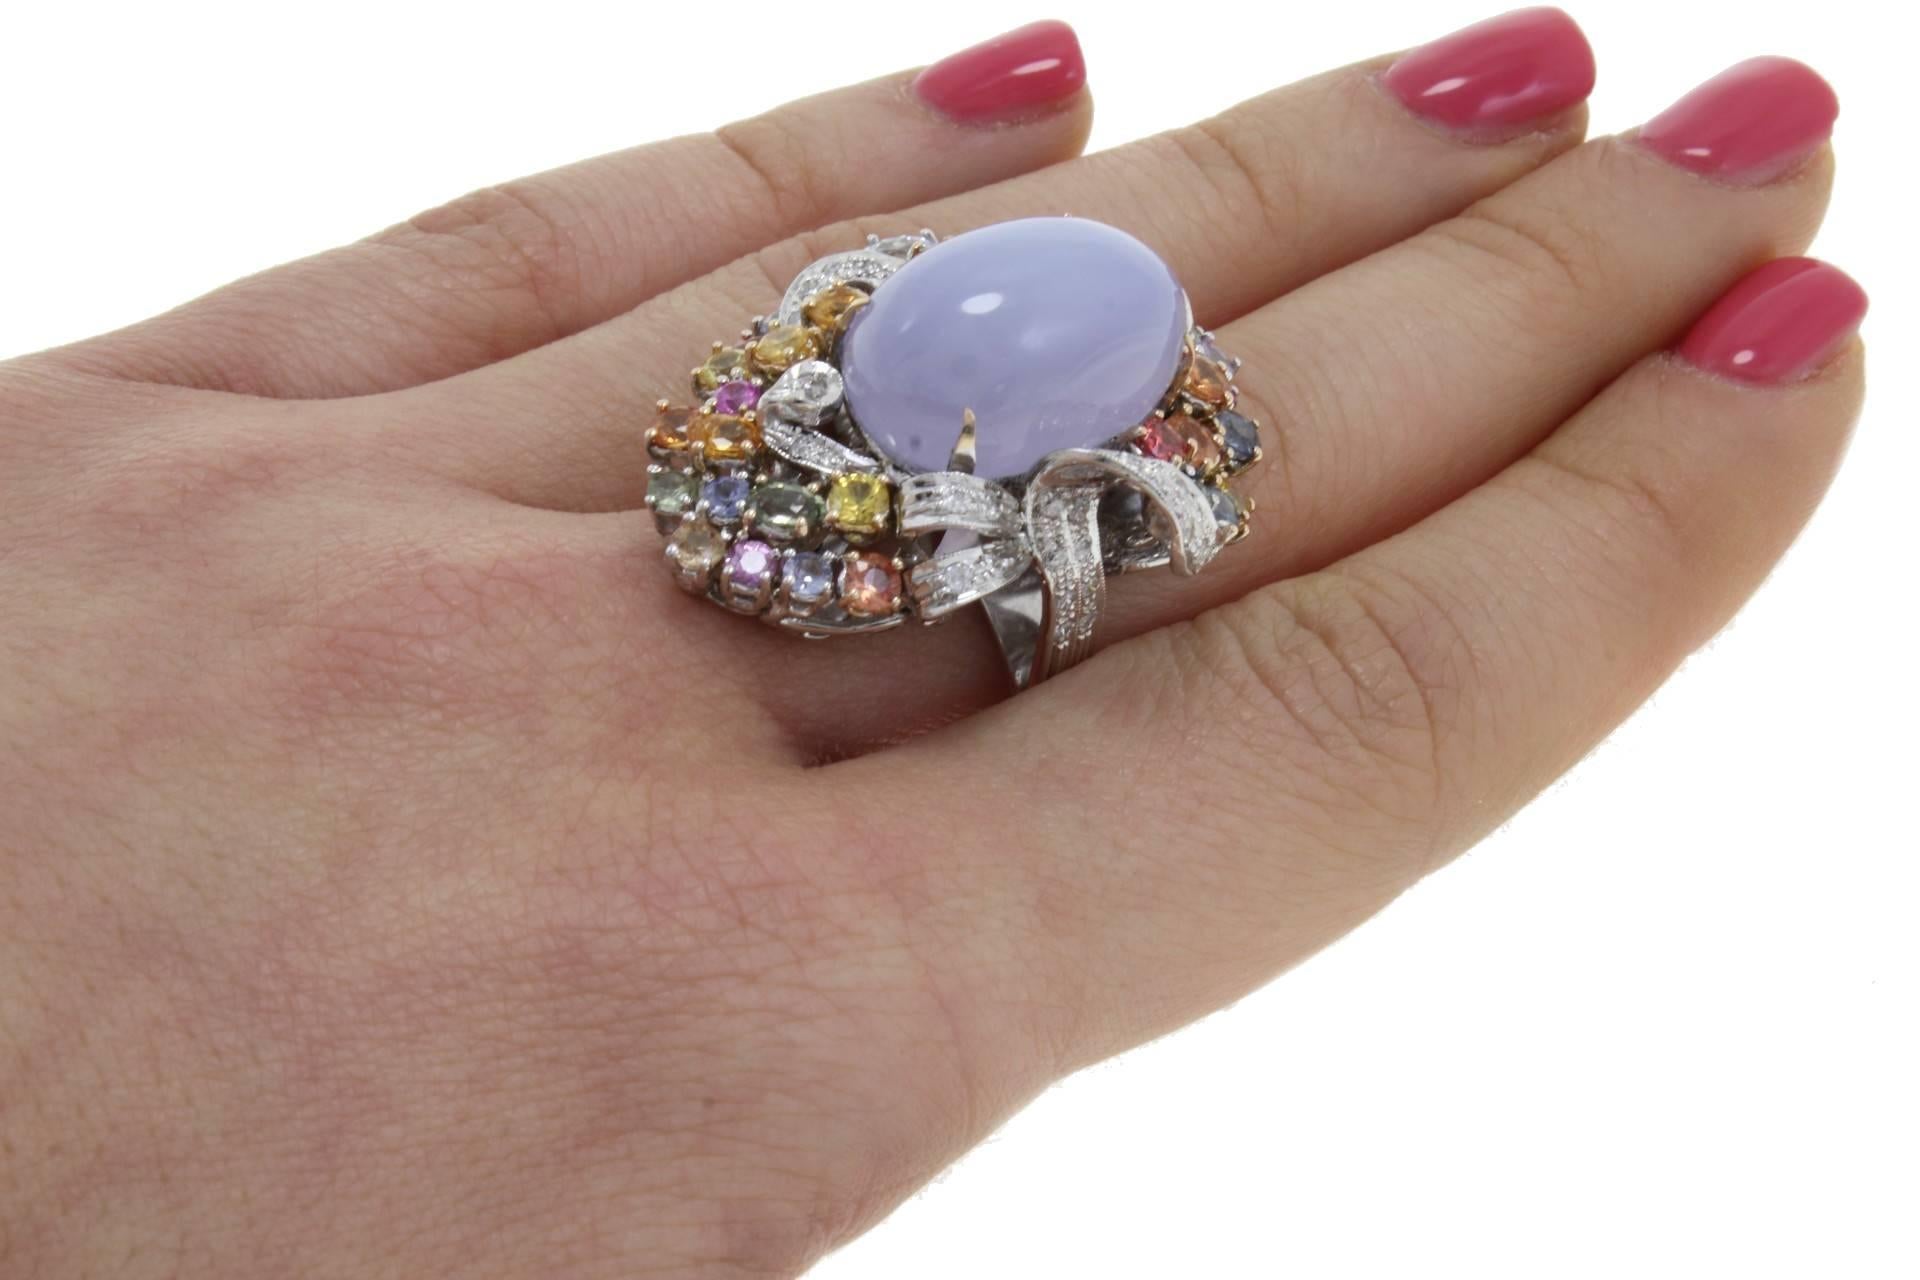 Retro Diamonds, Multi-Color Sapphires, Chalcedony, 14 Kt White and Rose Gold Ring. For Sale